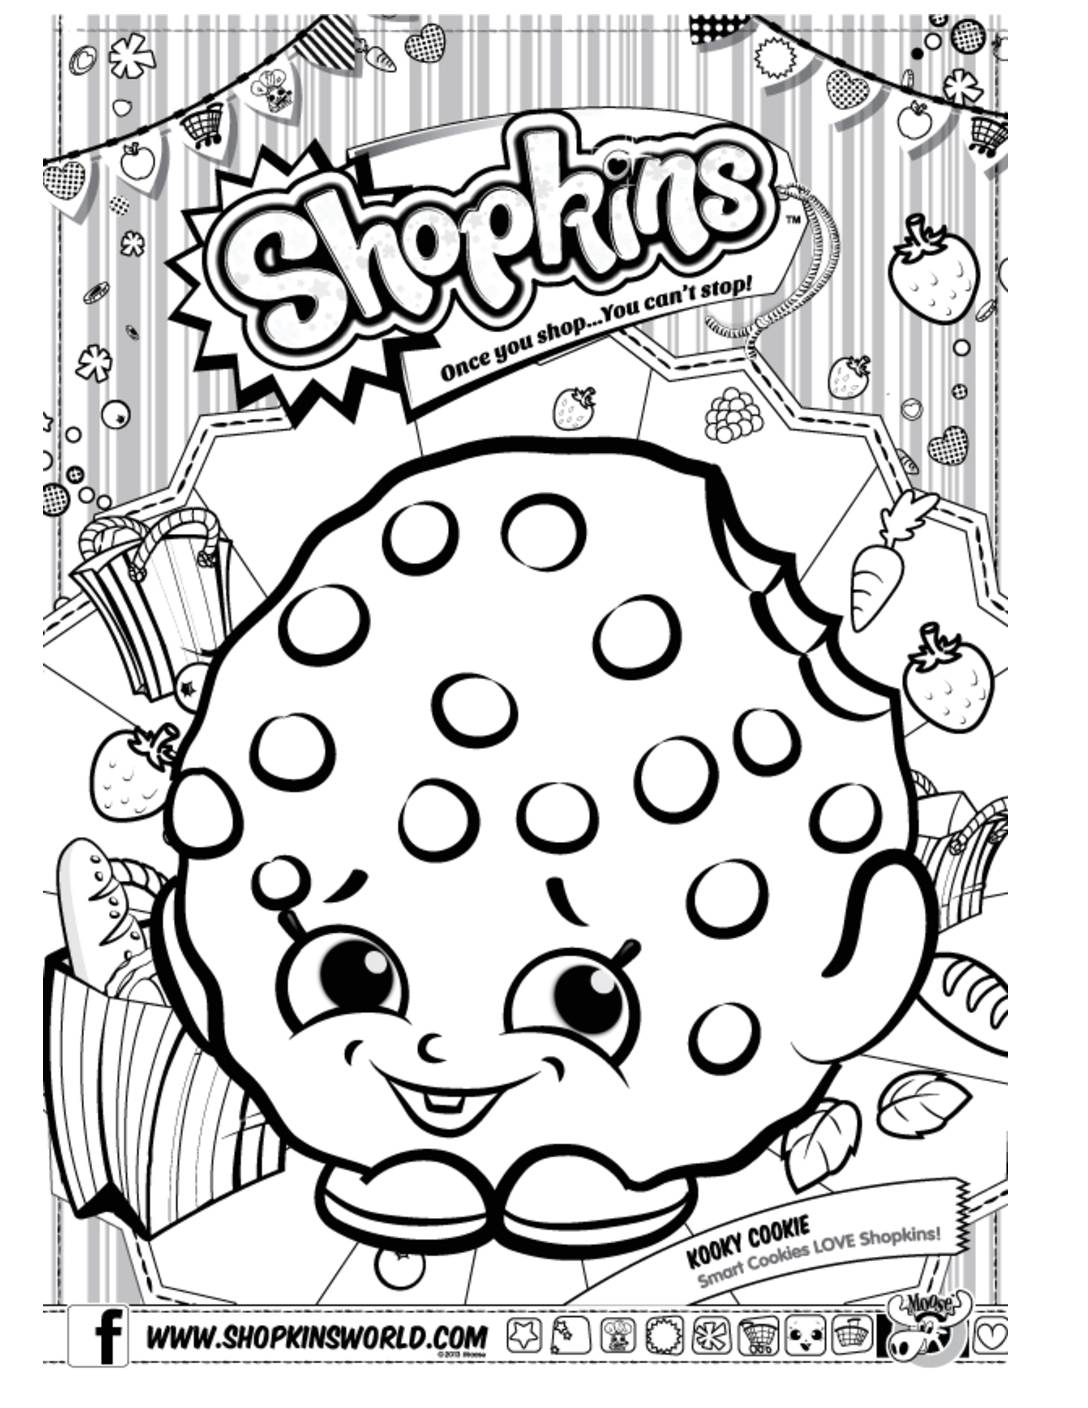 Shopkins Coloring Page Coloring Pages